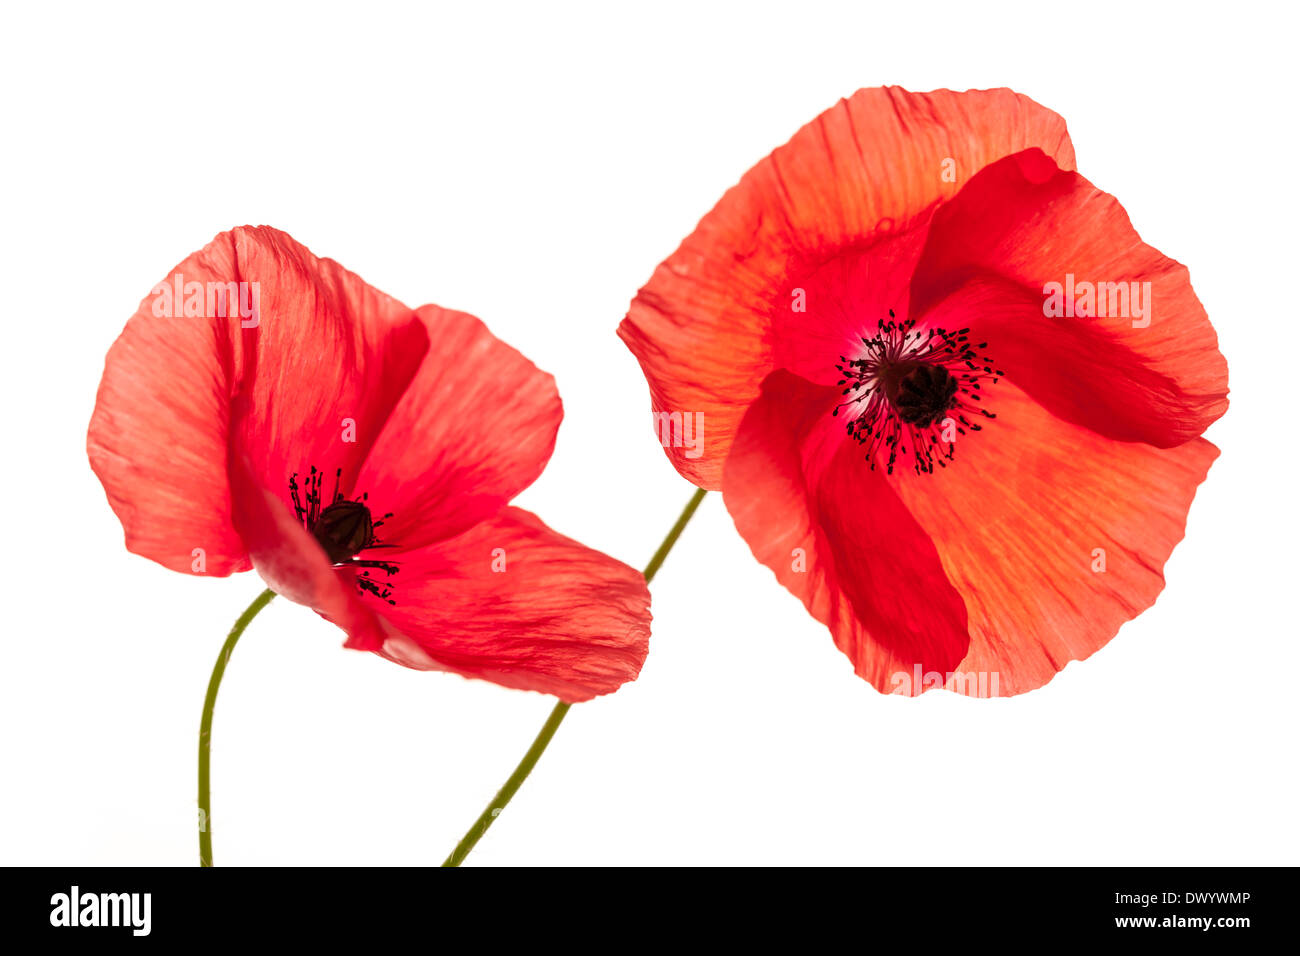 Two red poppy flowers isolated on white background, studio shot Stock Photo